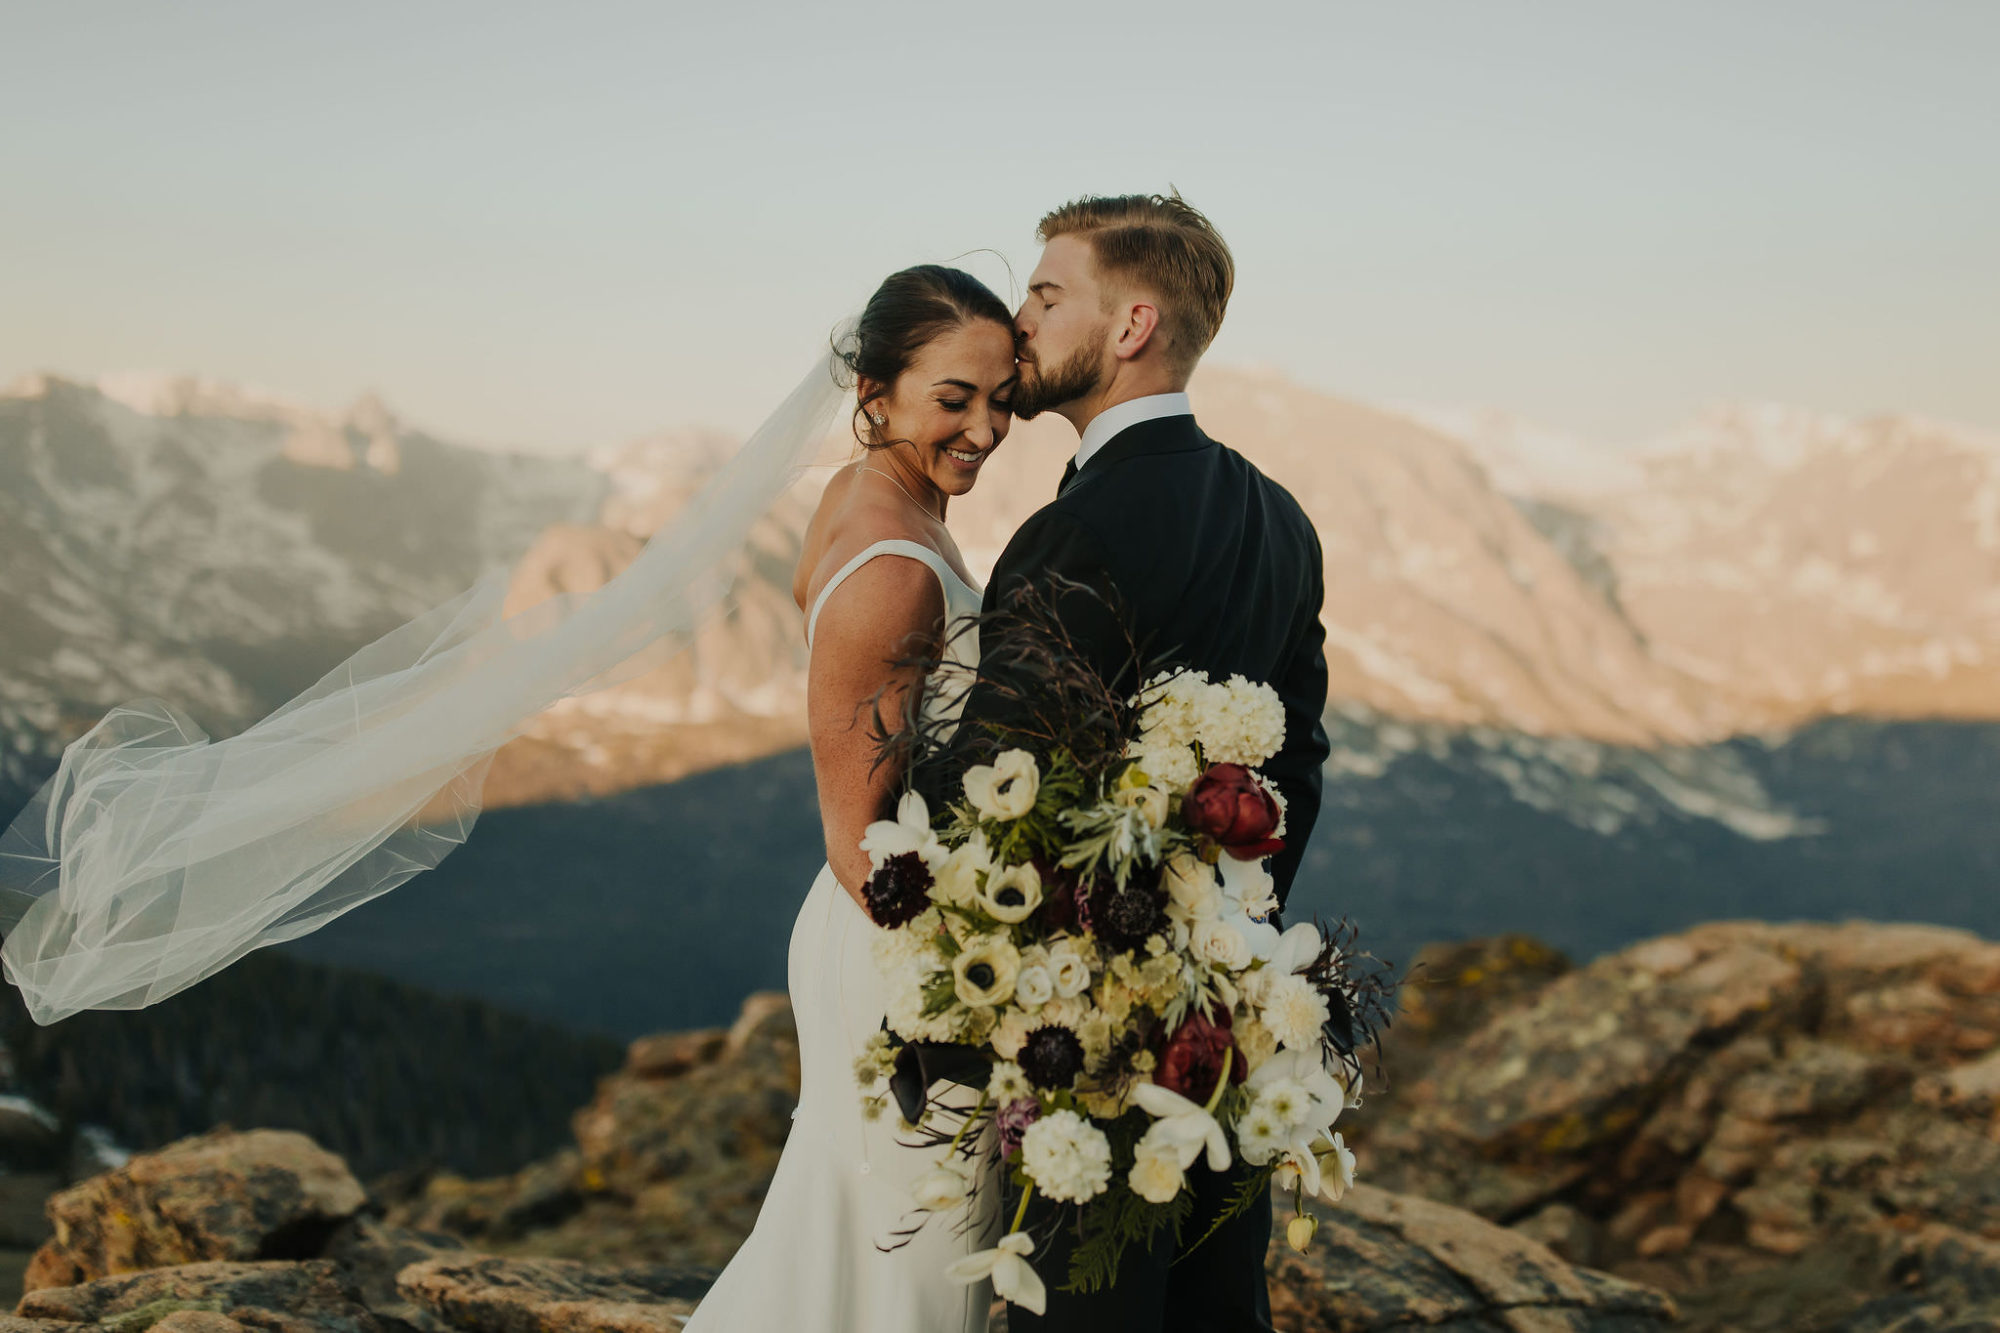 groom kissing his bride on the temple during their elopement ceremony in rocky mountain national park